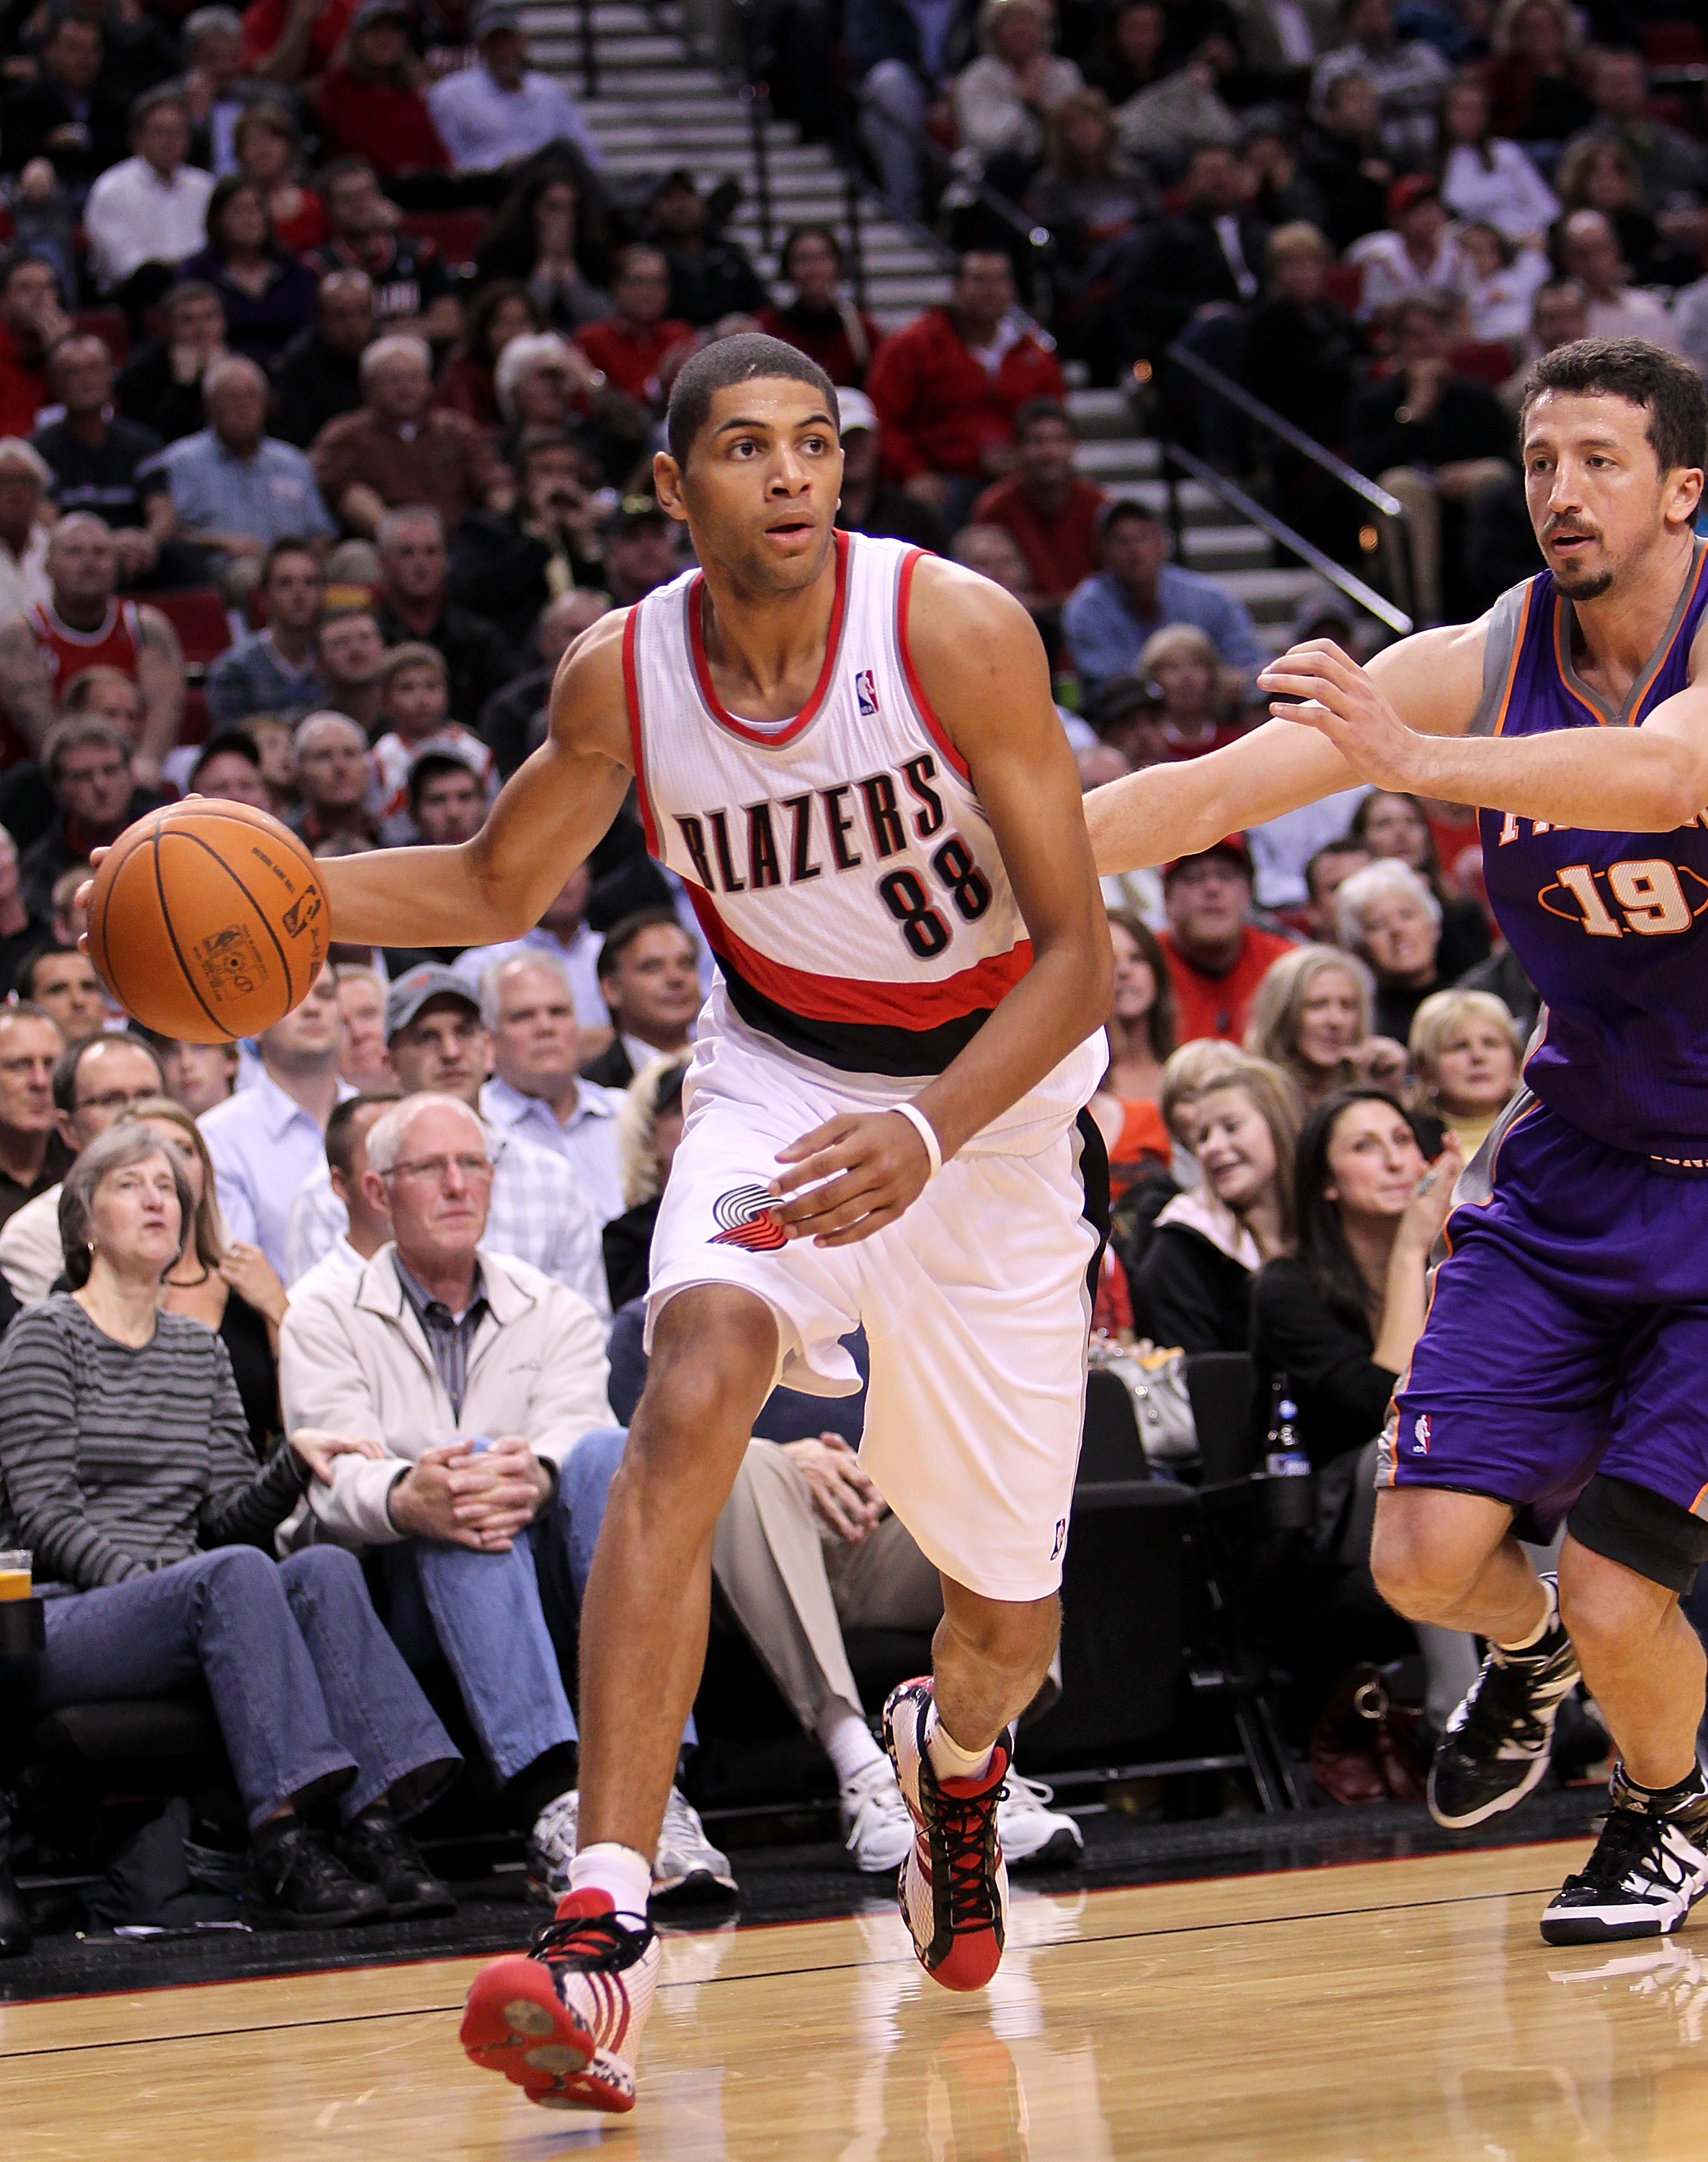 PORTLAND, OR - OCTOBER 26:  Nicolas Batum #88 dribbles the ball agaionst Hedo Tukgolu #19 of the Portland Trail Blazers of the Phoeninx Suns on October 26, 2010 at the Rose Garden in Portland, Oregon.  NOTE TO USER: User expressly acknowledges and agrees